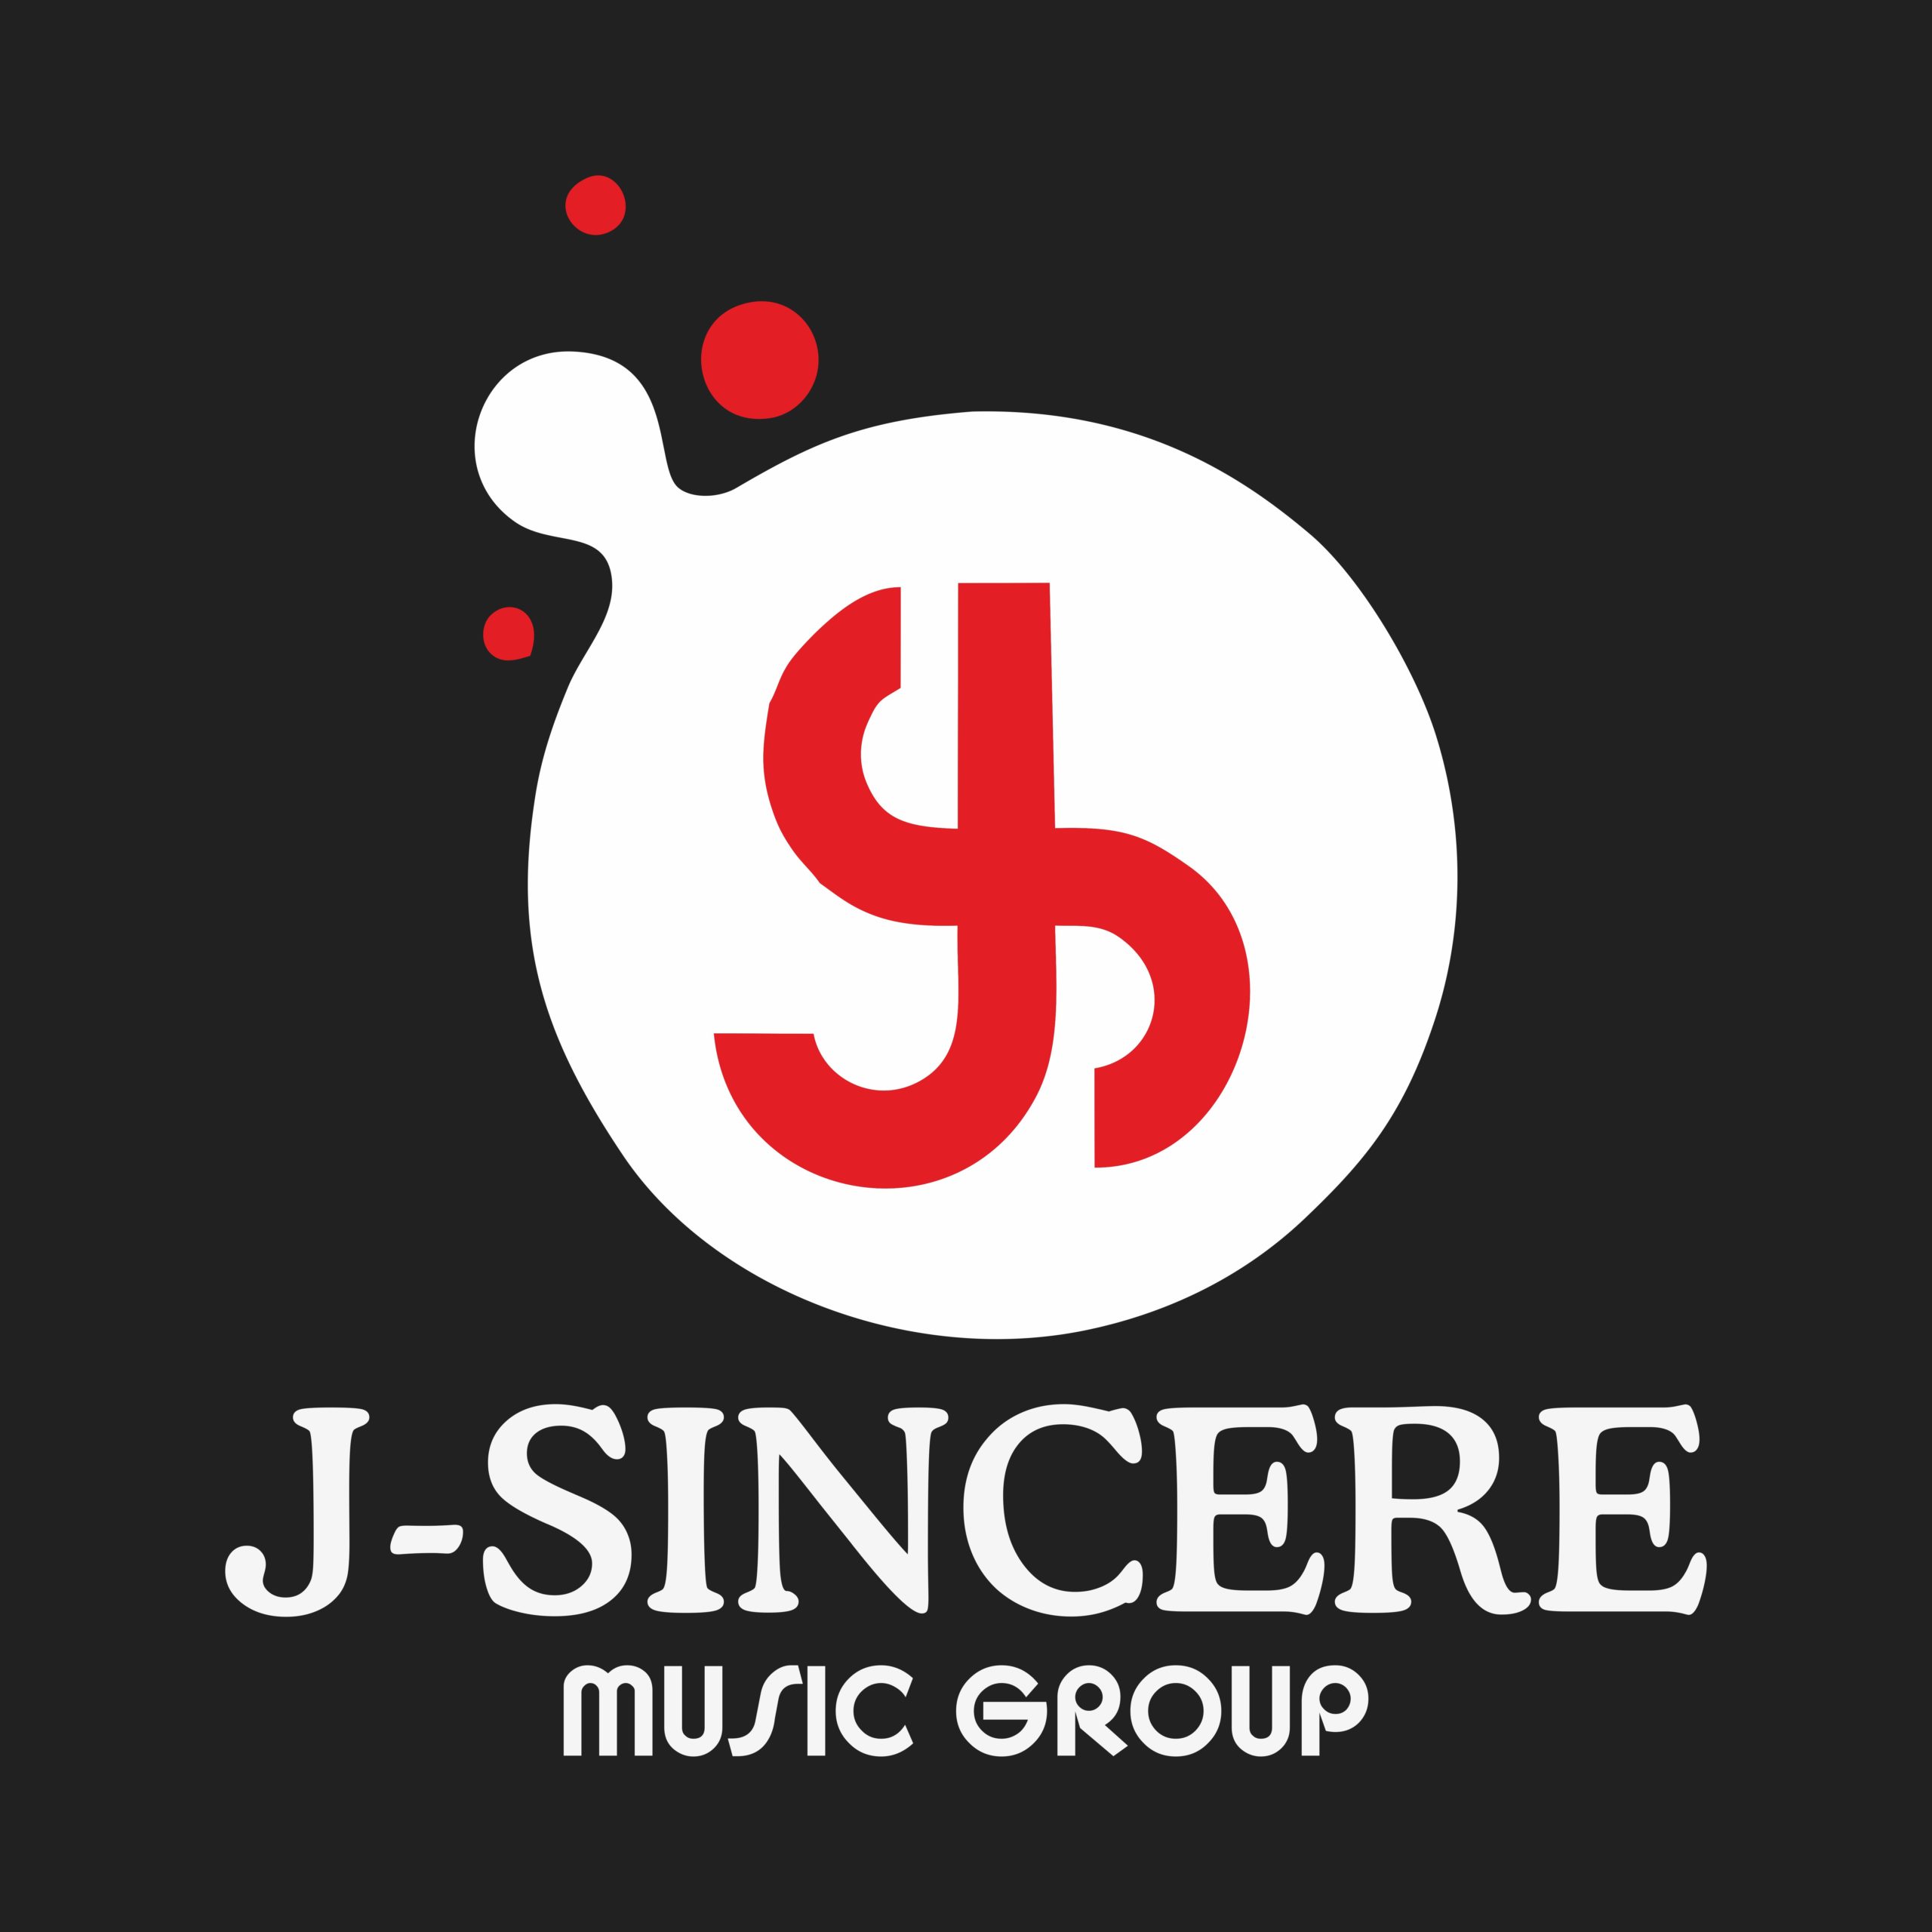 J-SINCERE MUSIC GROUP